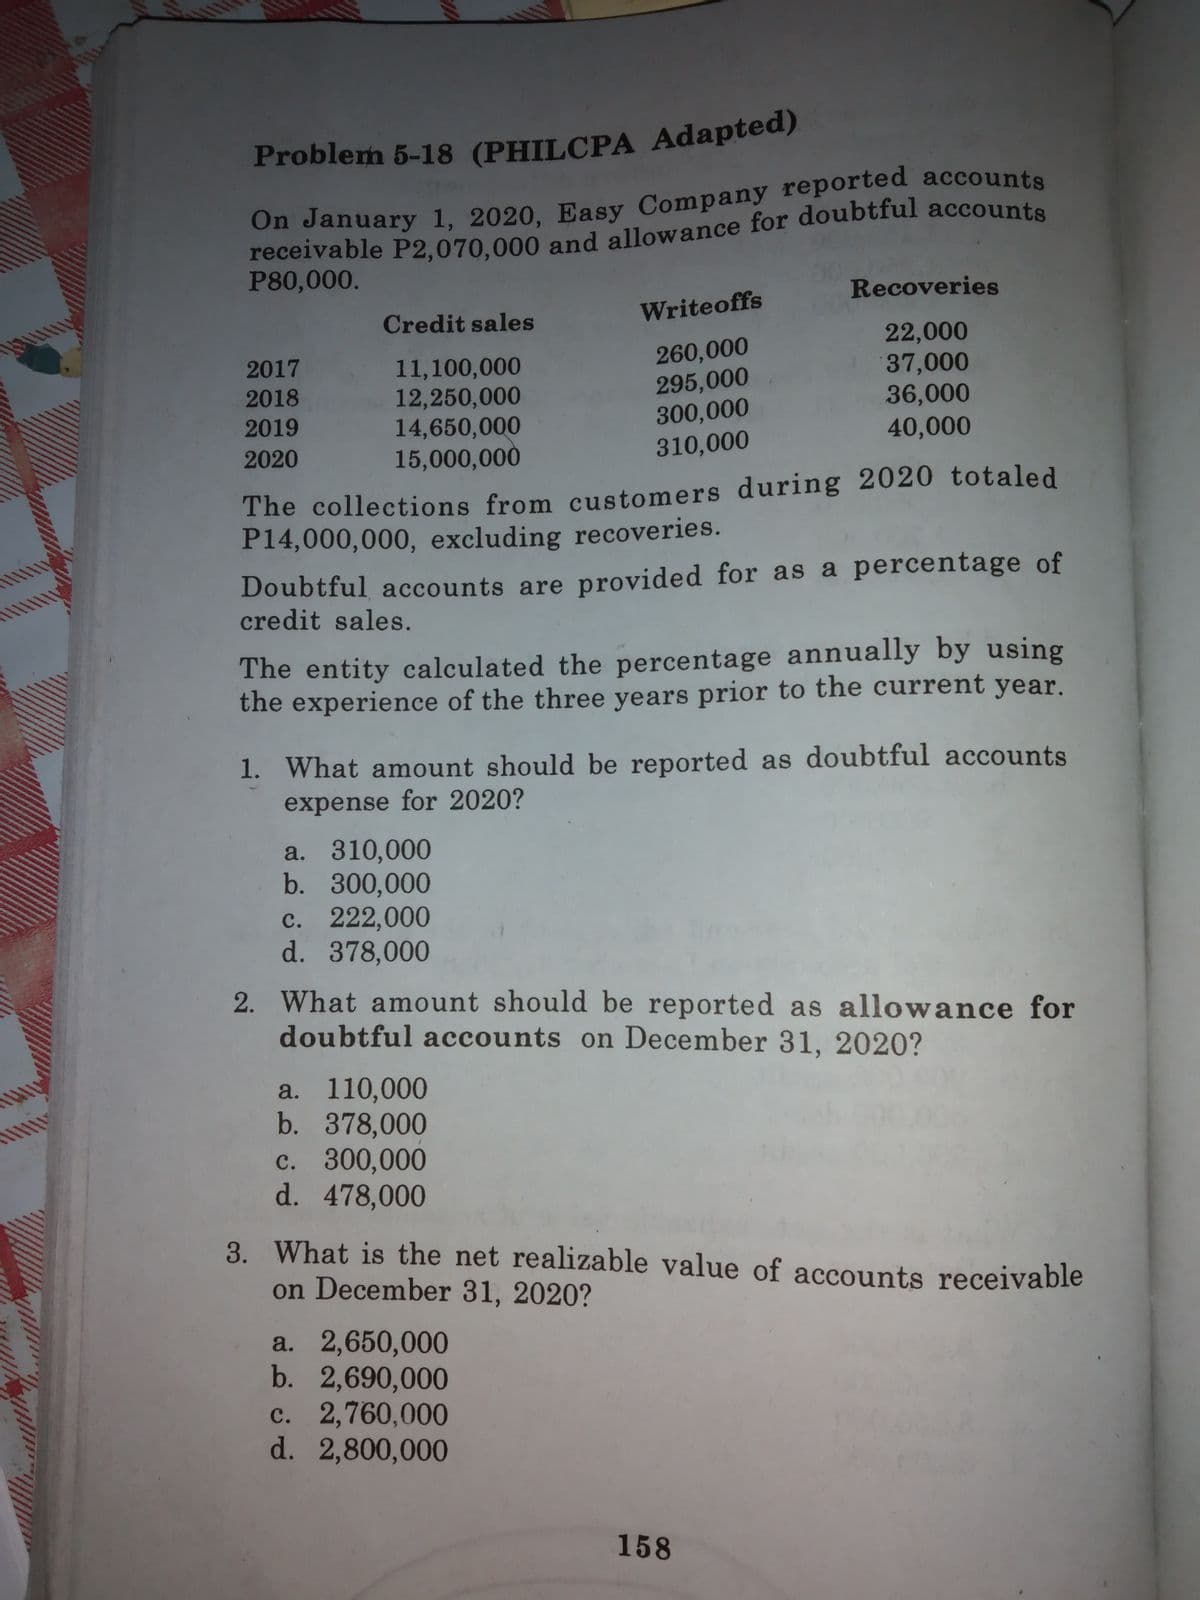 Problem 5-18 (PHILCPA Adapted)
P80,000.
Recoveries
Credit sales
Writeoffs
260,000
295,000
300,000
310,000
22,000
37,000
36,000
40,000
2017
11,100,000
12,250,000
14,650,000
15,000,000
2018
2019
2020
The collections from customers during 2020 totaled
P14,000,000, excluding recoveries.
Doubtful accounts are provided for as a percentage of
credit sales.
The entity calculated the percentage annually by using
the experience of the three years prior to the current year.
1. What amount should be reported as doubtful accounts
expense for 2020?
a. 310,000
b. 300,000
c. 222,000
d. 378,000
2. What amount should be reported as allowance for
doubtful accounts on December 31, 2020?
a. 110,000
b. 378,000
c. 300,000
d. 478,000
im
3. What is the net realizable value of accounts receivable
on December 31, 2020?
a. 2,650,000
b. 2,690,000
c. 2,760,000
d. 2,800,000
158
